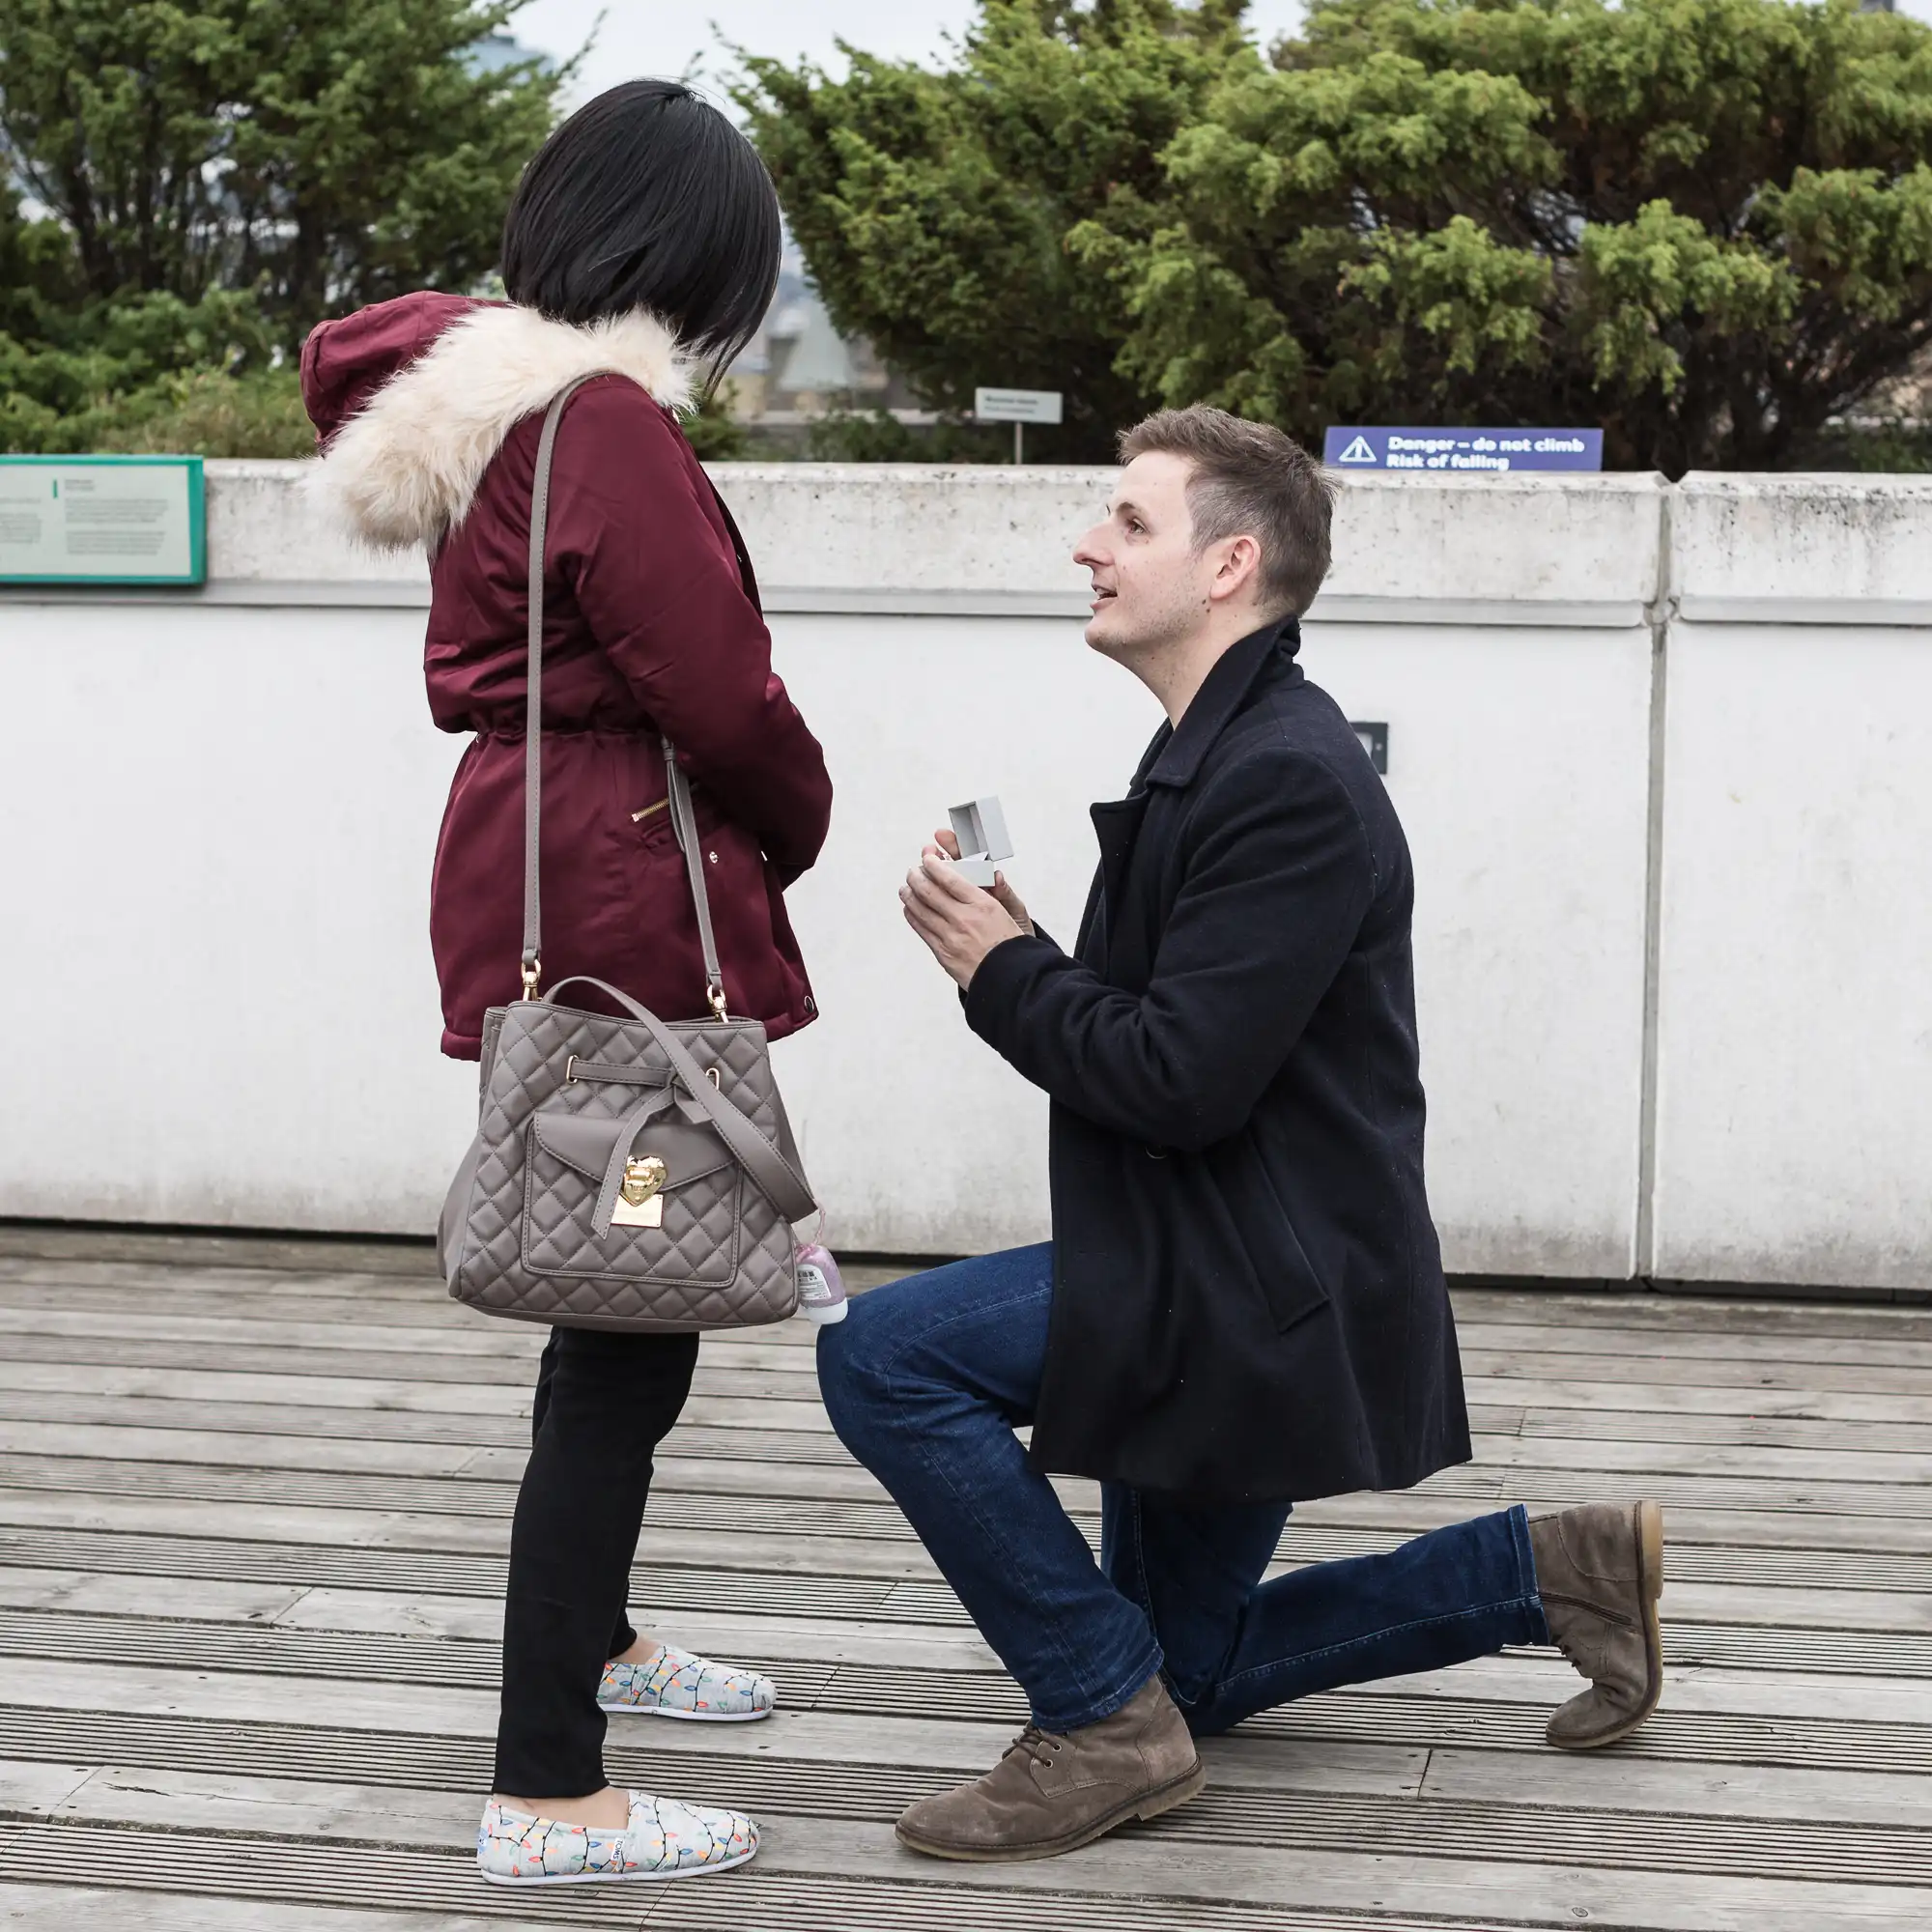 Man kneeling and holding a ring box in front of a woman on an outdoor balcony, appearing to propose.